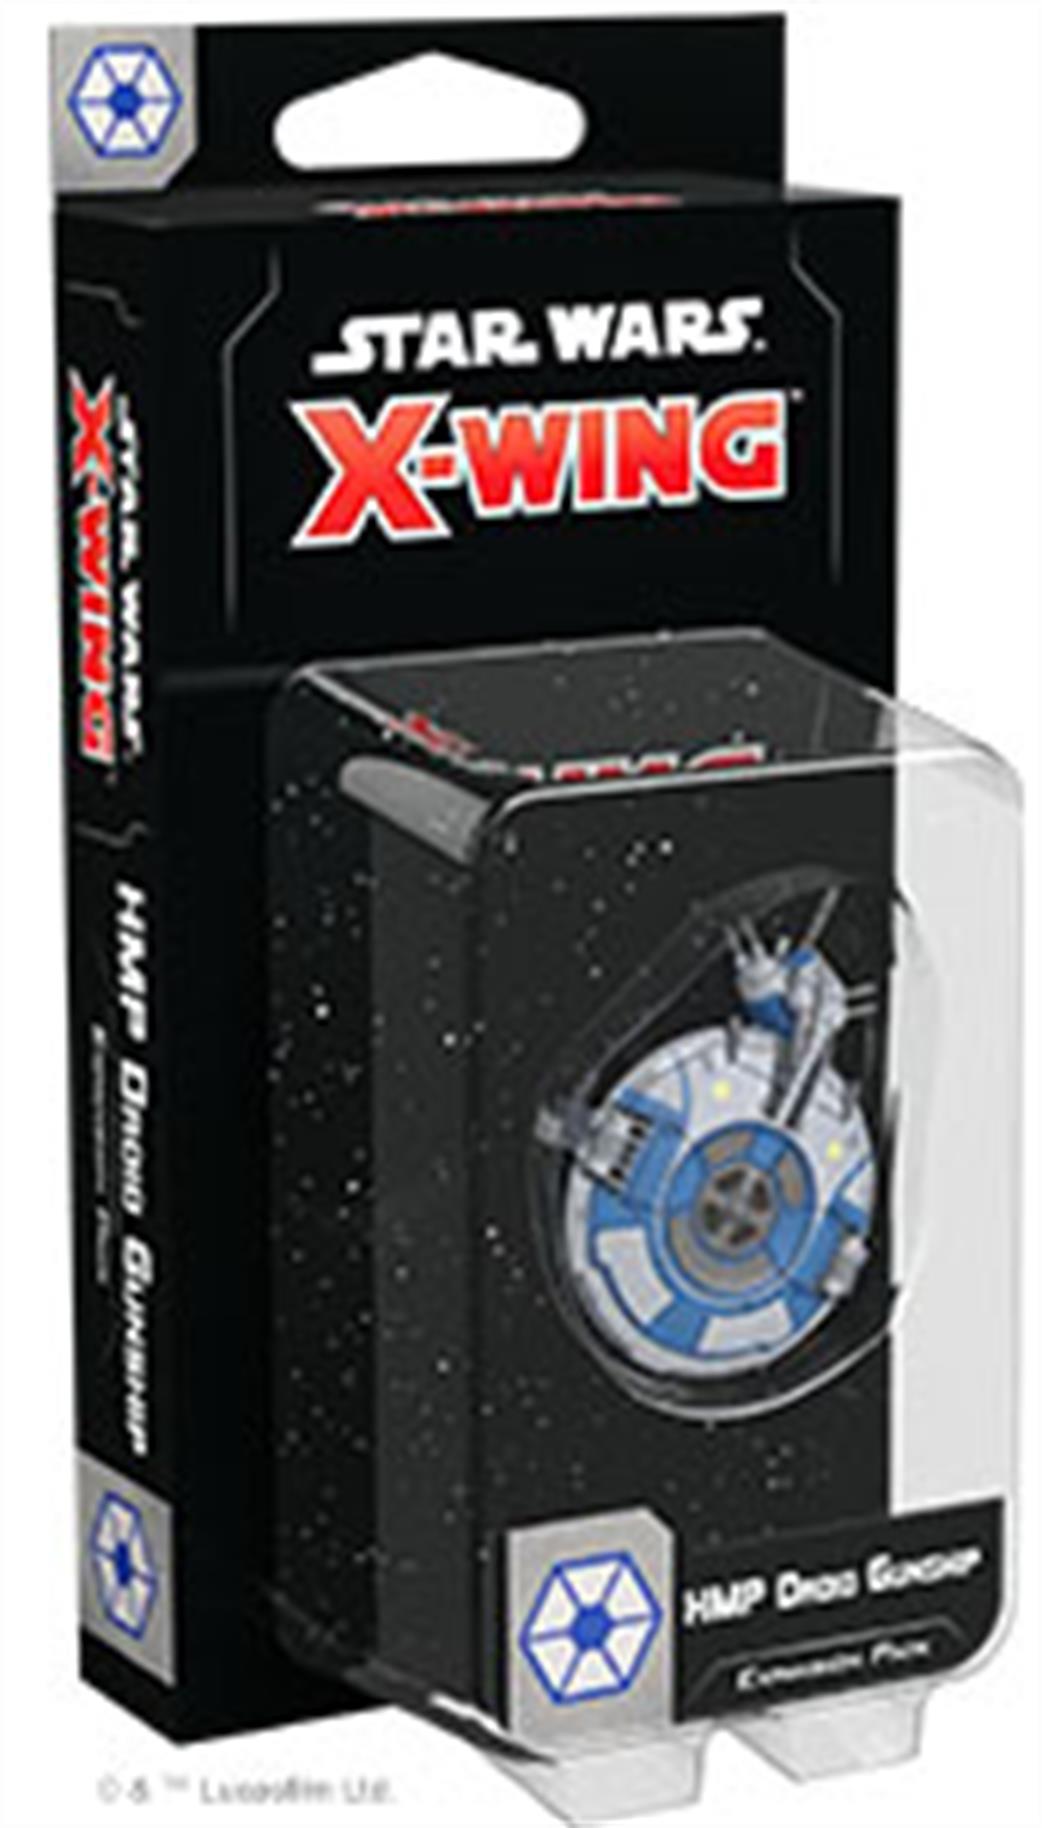 Fantasy Flight Games  SWZ71 HMP Droid Gunship Expansion Pack from Star Wars X-Wing 2nd Ed